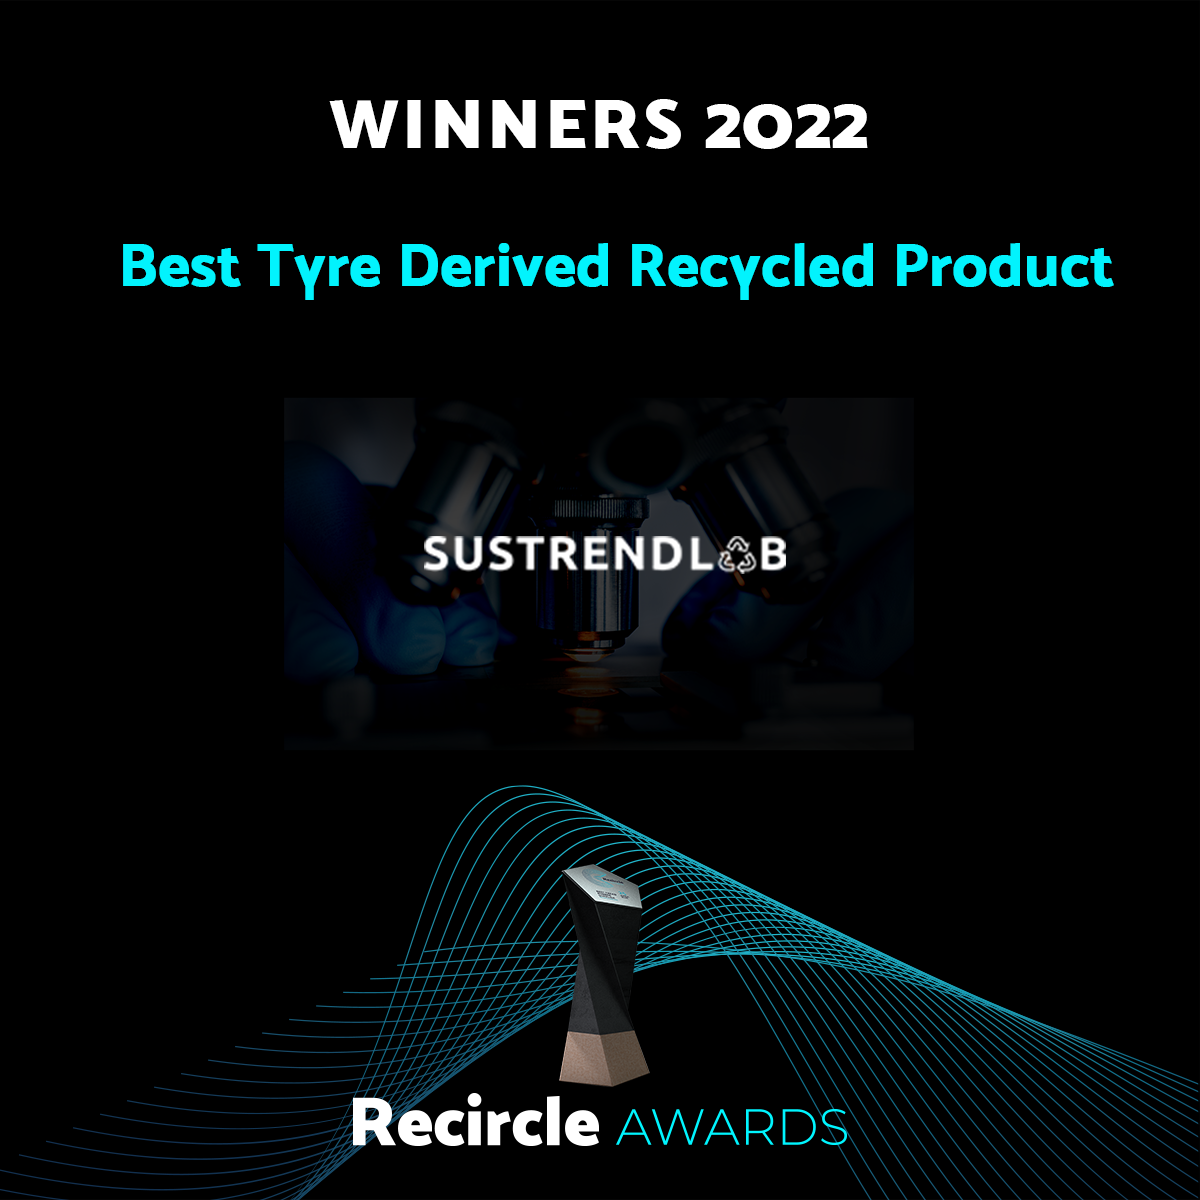 Best Tyre Derived Recycled Product 22